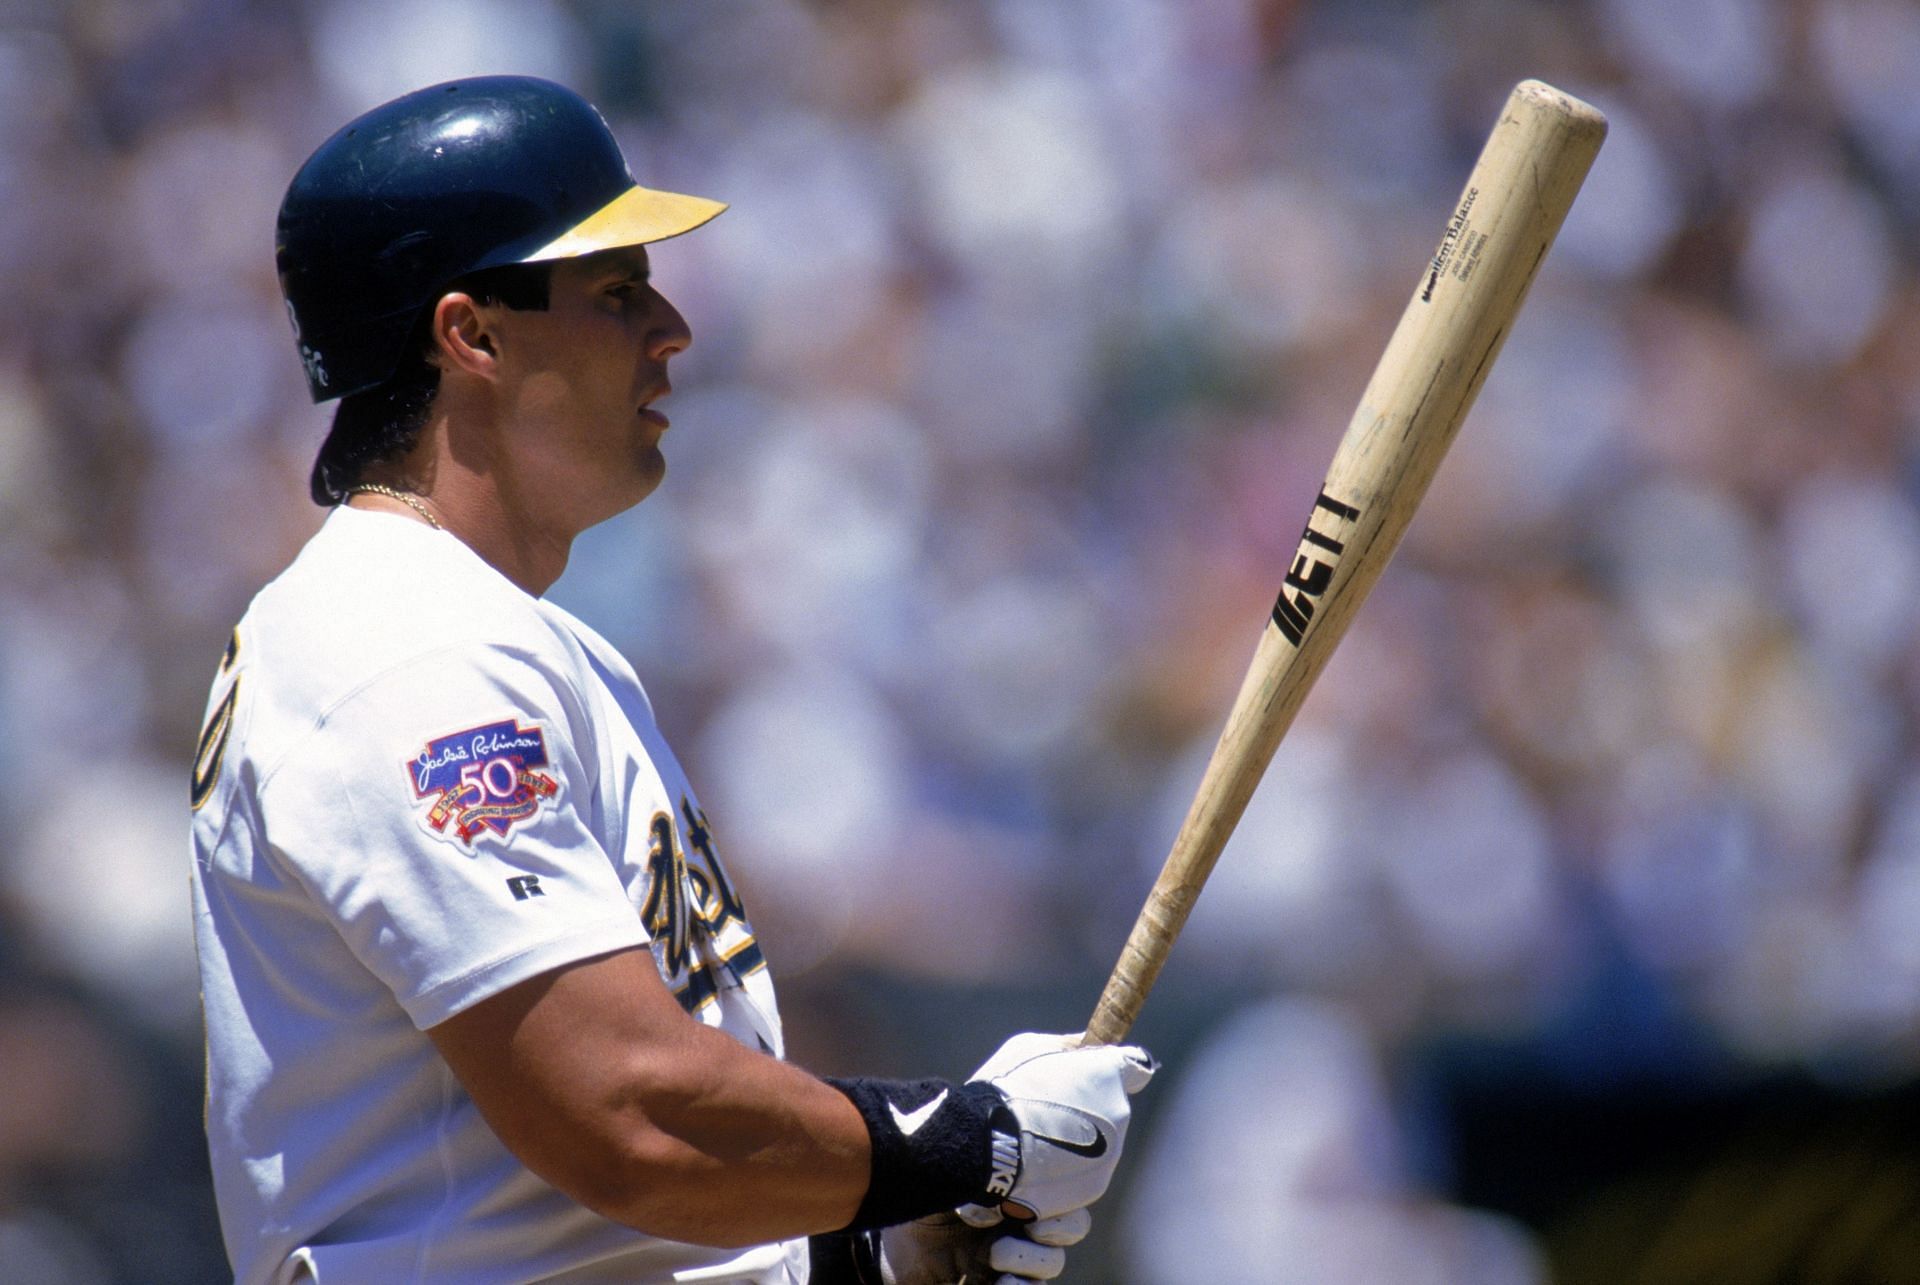 Rockies v Athletics: OAKLAND, CA - JUNE 14: Jose Canseco (33) of the Oakland Athletics stands ready at the plate against the Colorado Rockies during a game at Oakland-Alameda County Coliseum on June 14, 1997, in Oakland, California. The Rockies won 7-1. (Photo by Otto Greule Jr/Getty Images)